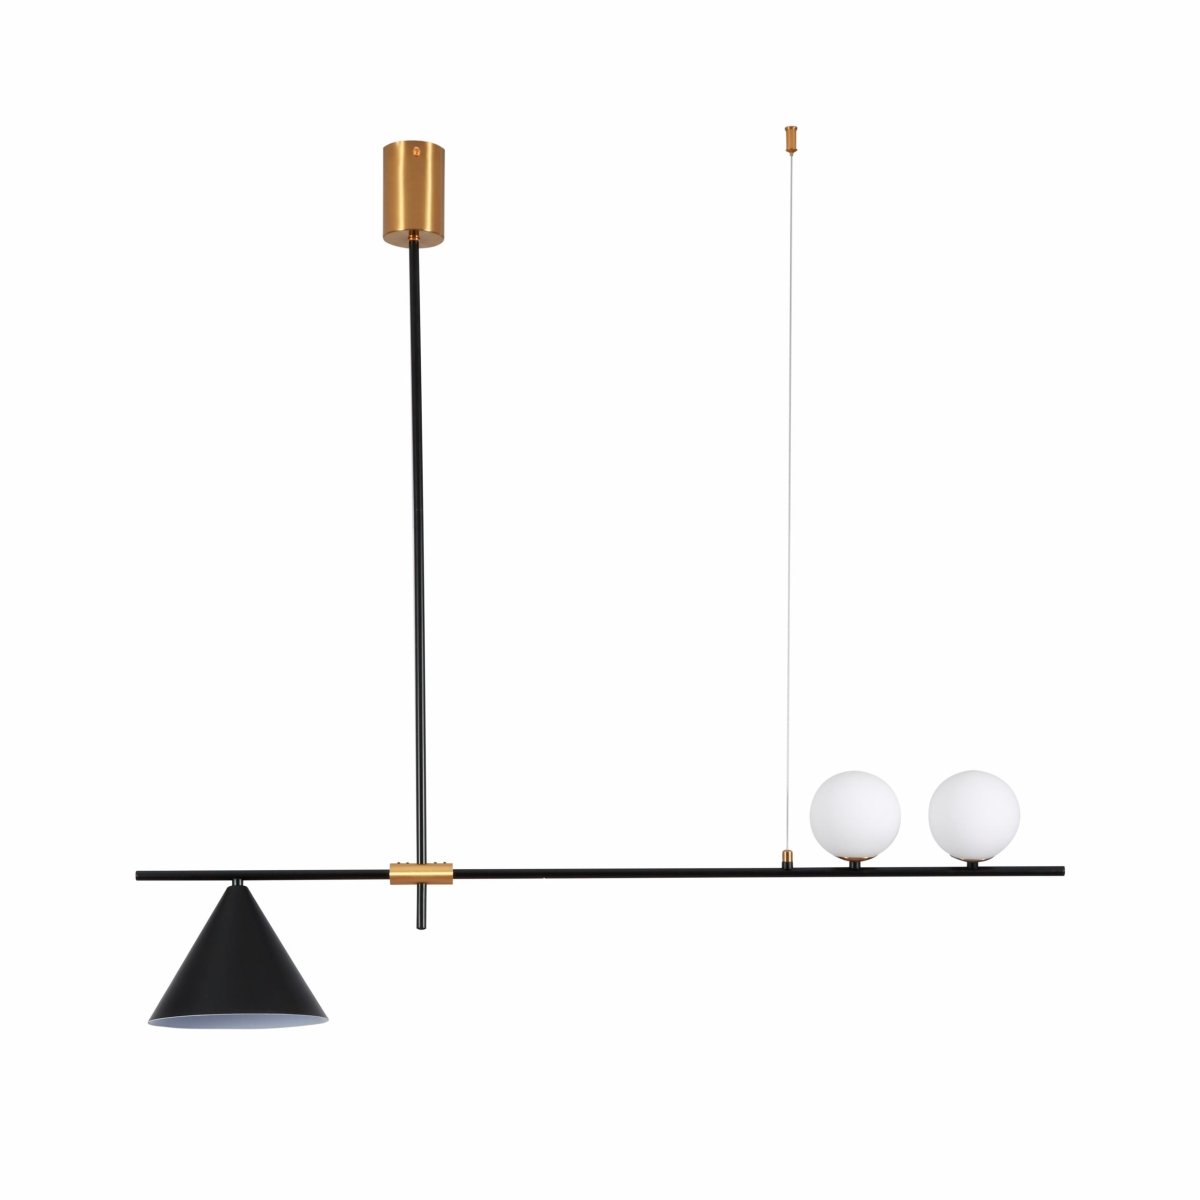 Main image of Nordic Modern Island Chandelier with 2xG9 and E27 Fittings Black Gold and White Finish | TEKLED 159-17492